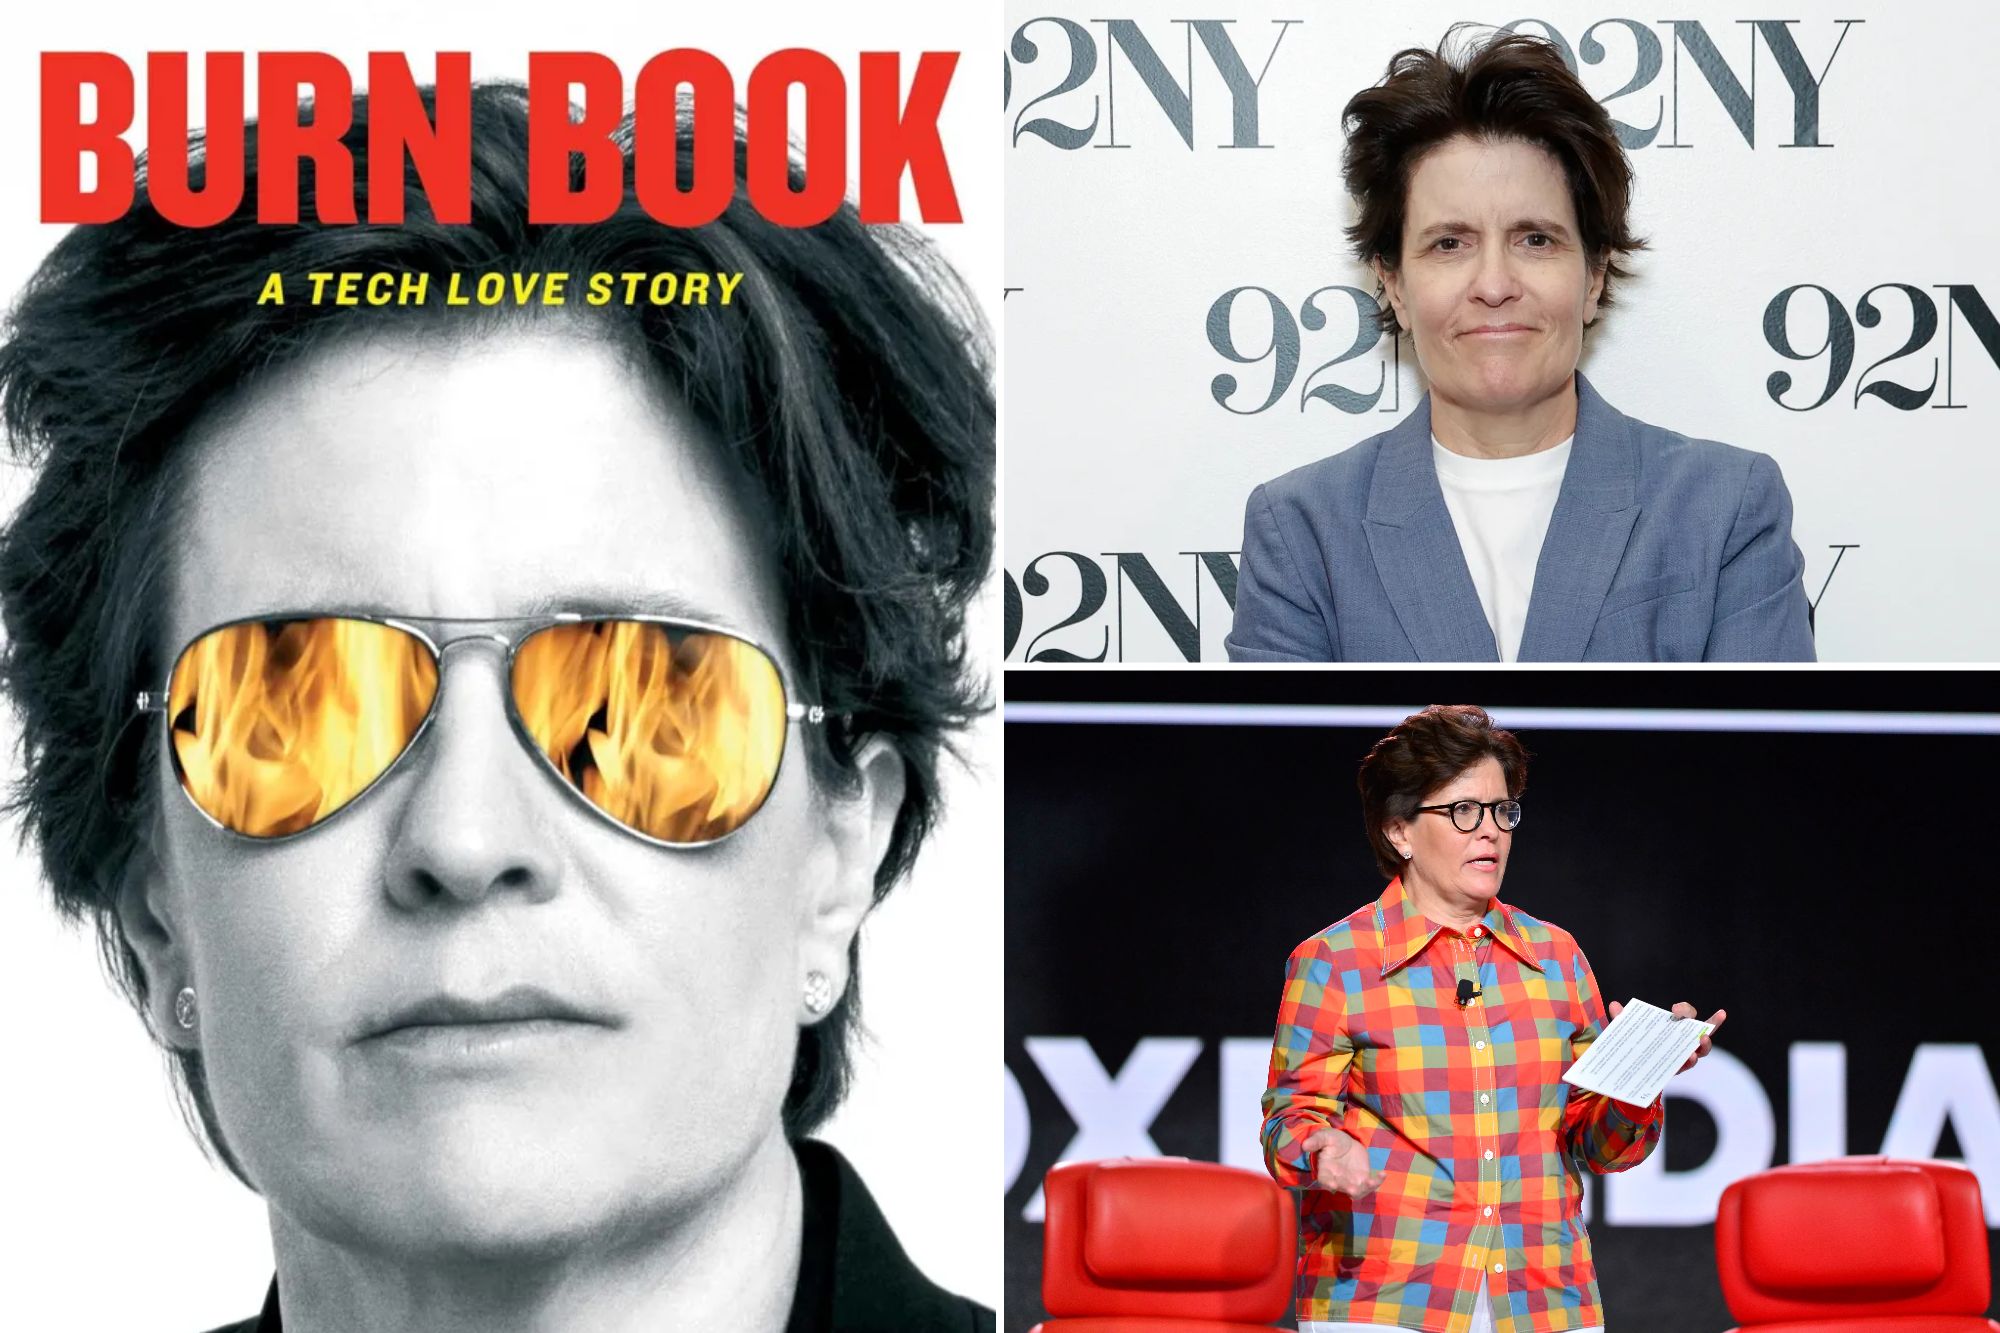 Tech journalist Kara Swisher takes reader behind the scenes of the rise of digital culture.